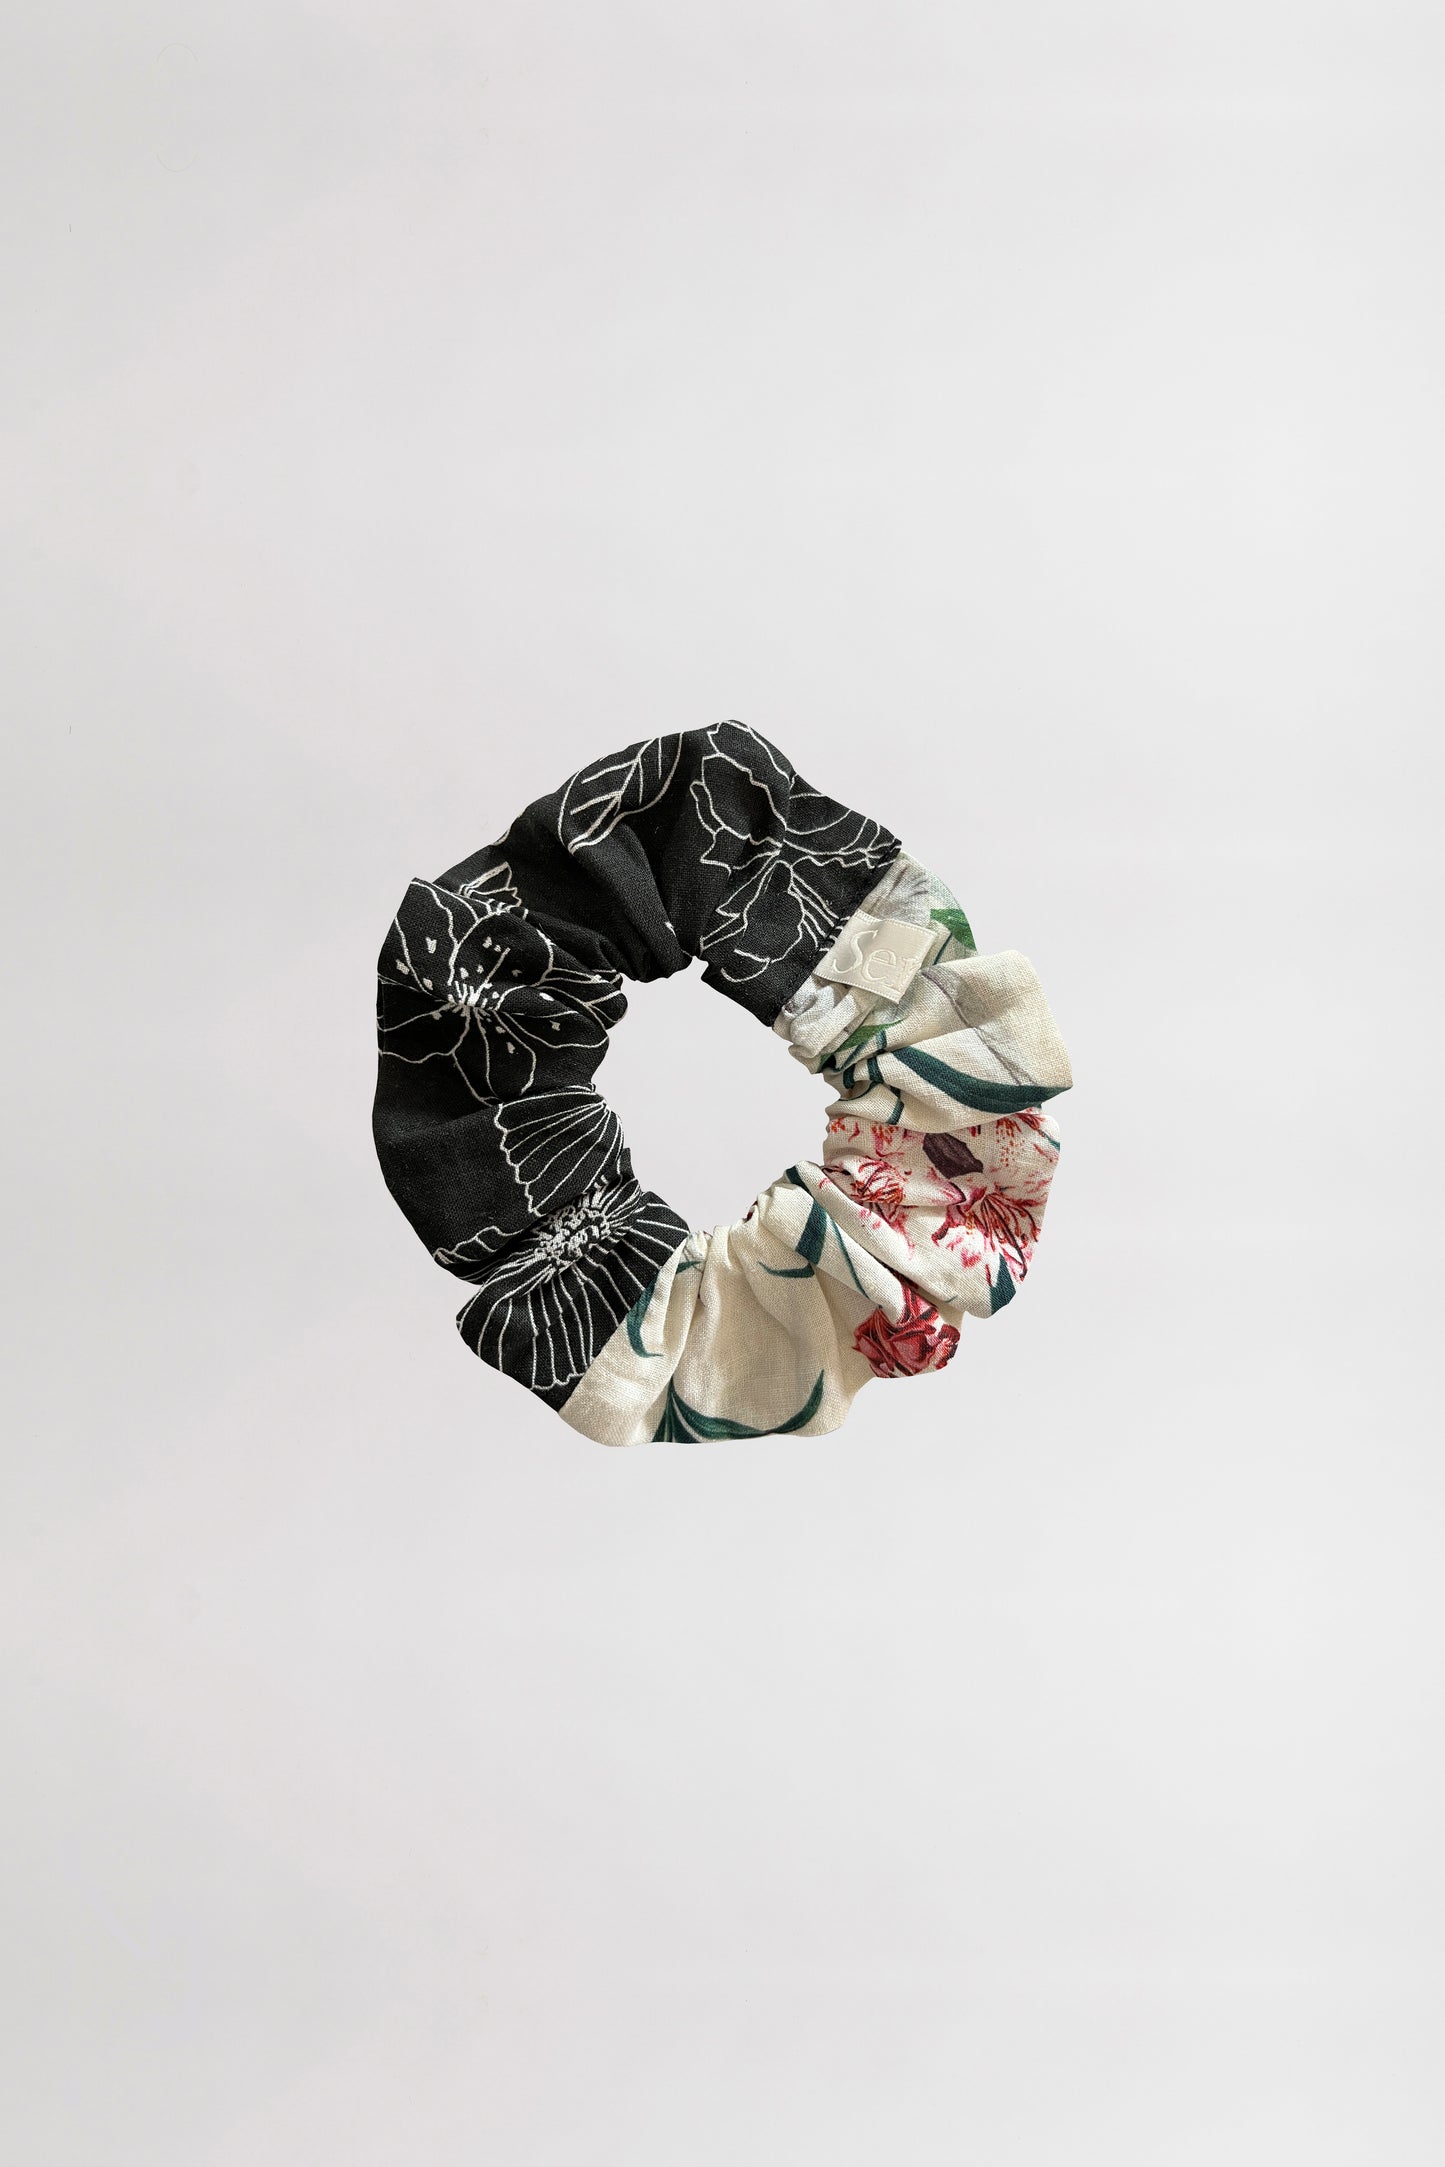 Front view of a scrunchie featuring two unique floral designs, one dark and one light, crafted from leftover fabrics against a neutral background.